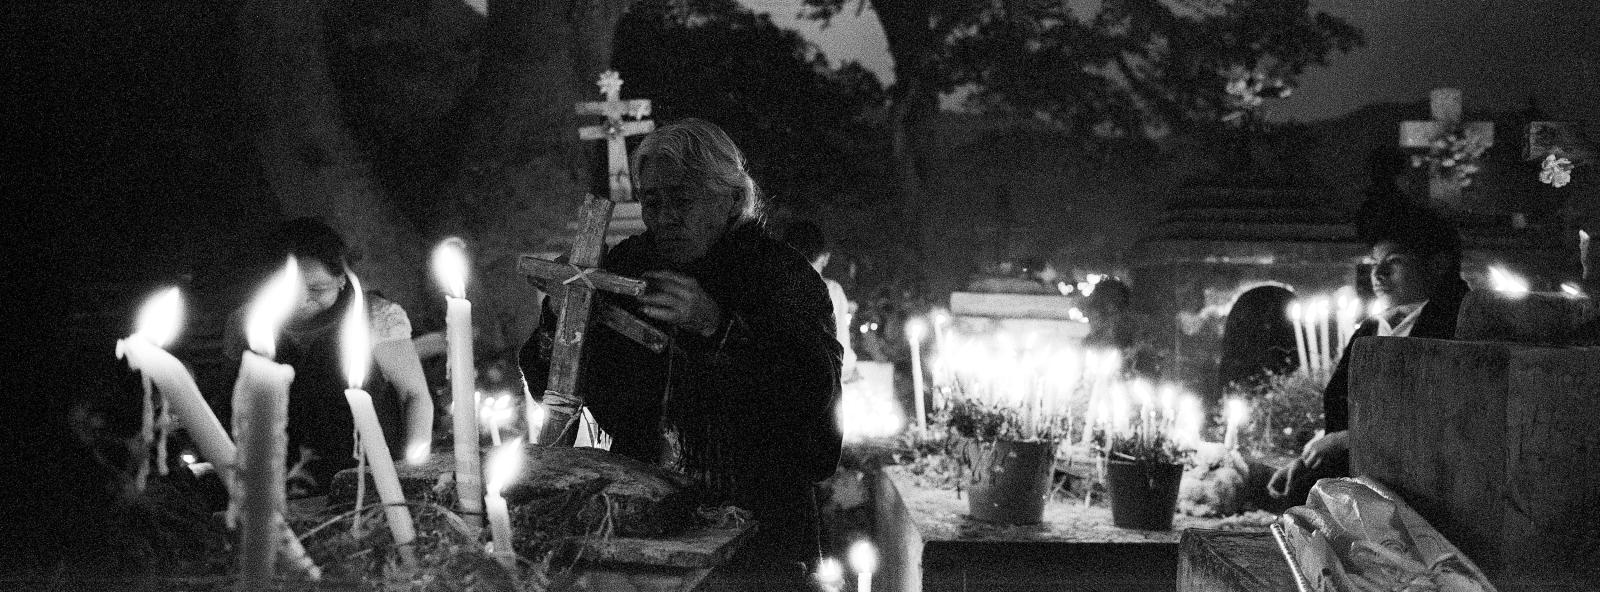 Day of the Dead in Mazatl&aacute;n Villa de Flores Oaxaca, Mexico. Photographed using a Hasselblad Xpan with black and white film.